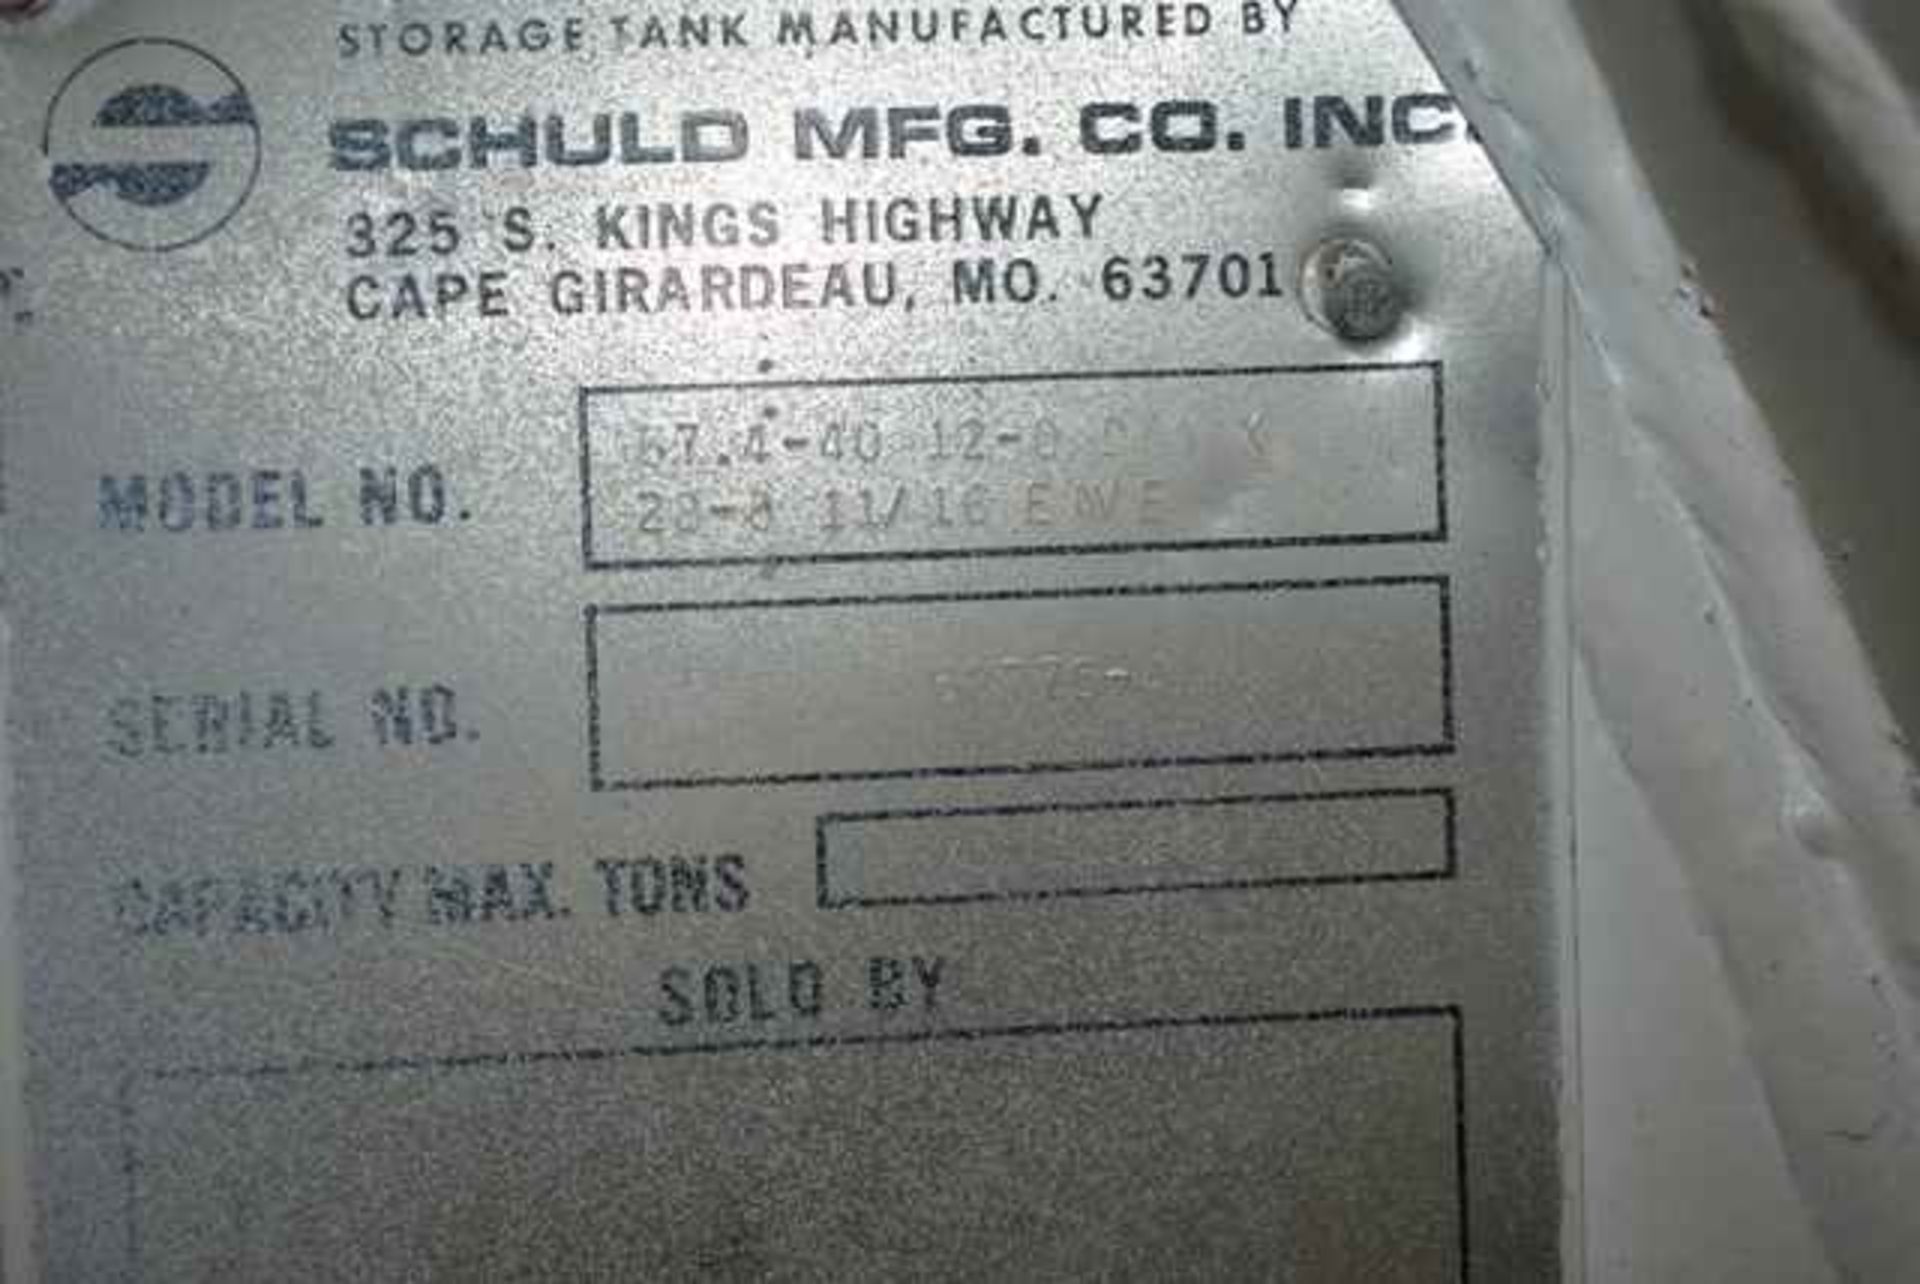 Schuld Manufacturing Company Model #67.4-40 Steel Silo/12' Diameter x 28' 8" Ht., Rated 52 Ton - Image 5 of 5